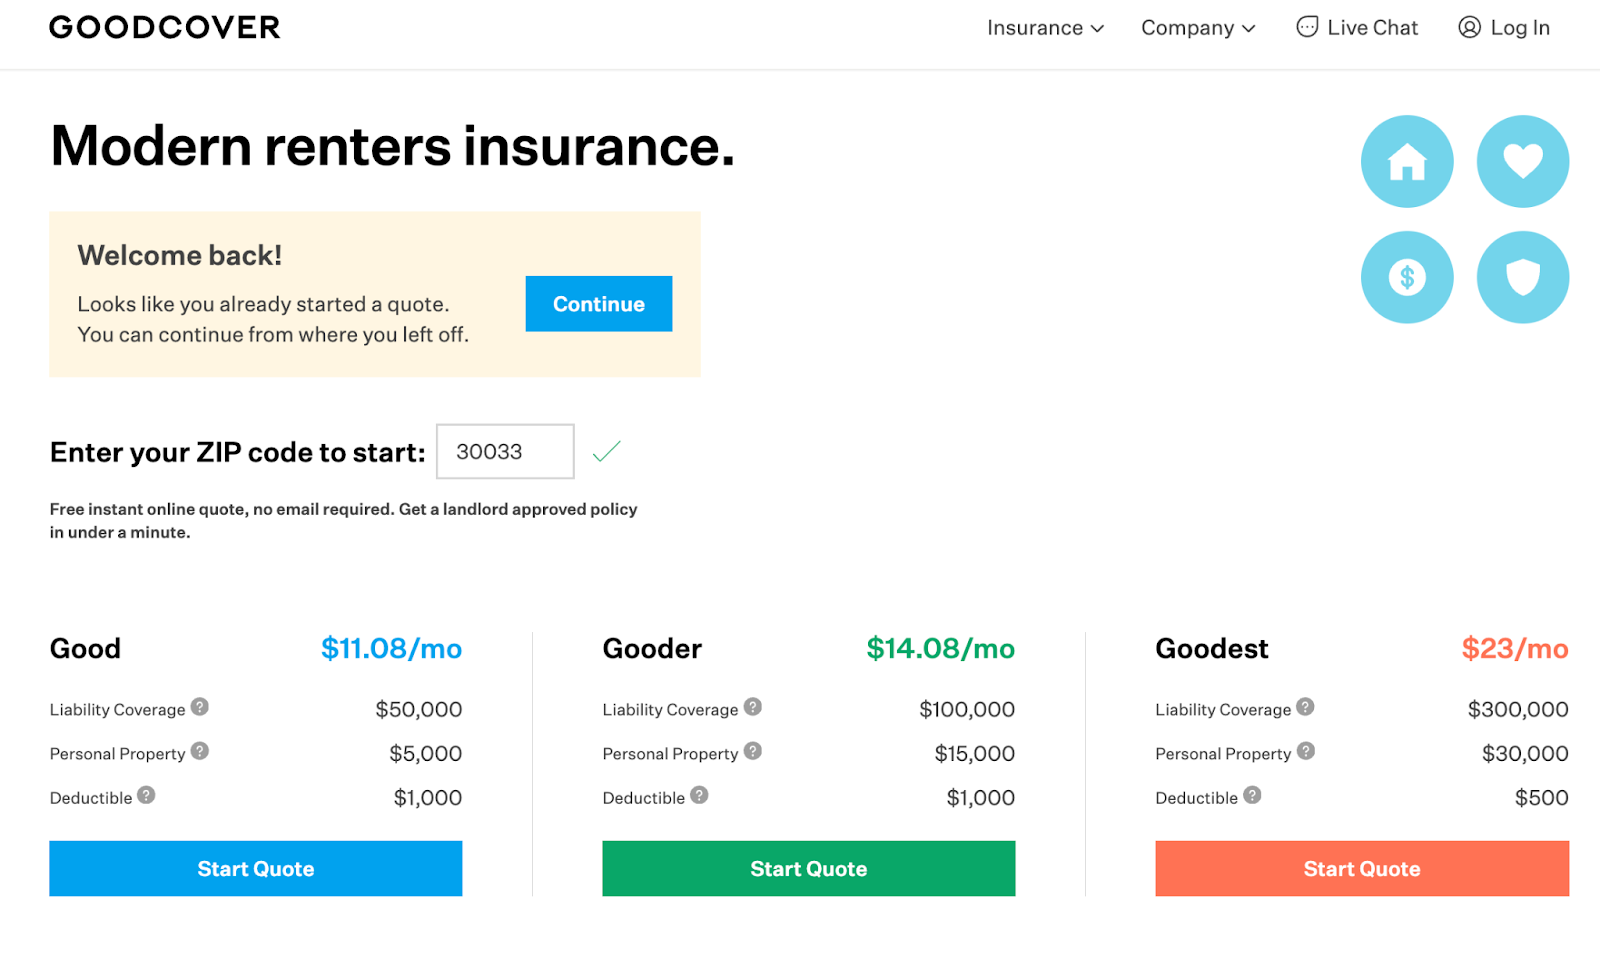 Goodcover’s Complete Guide to Renters Insurance in Atlanta, GA